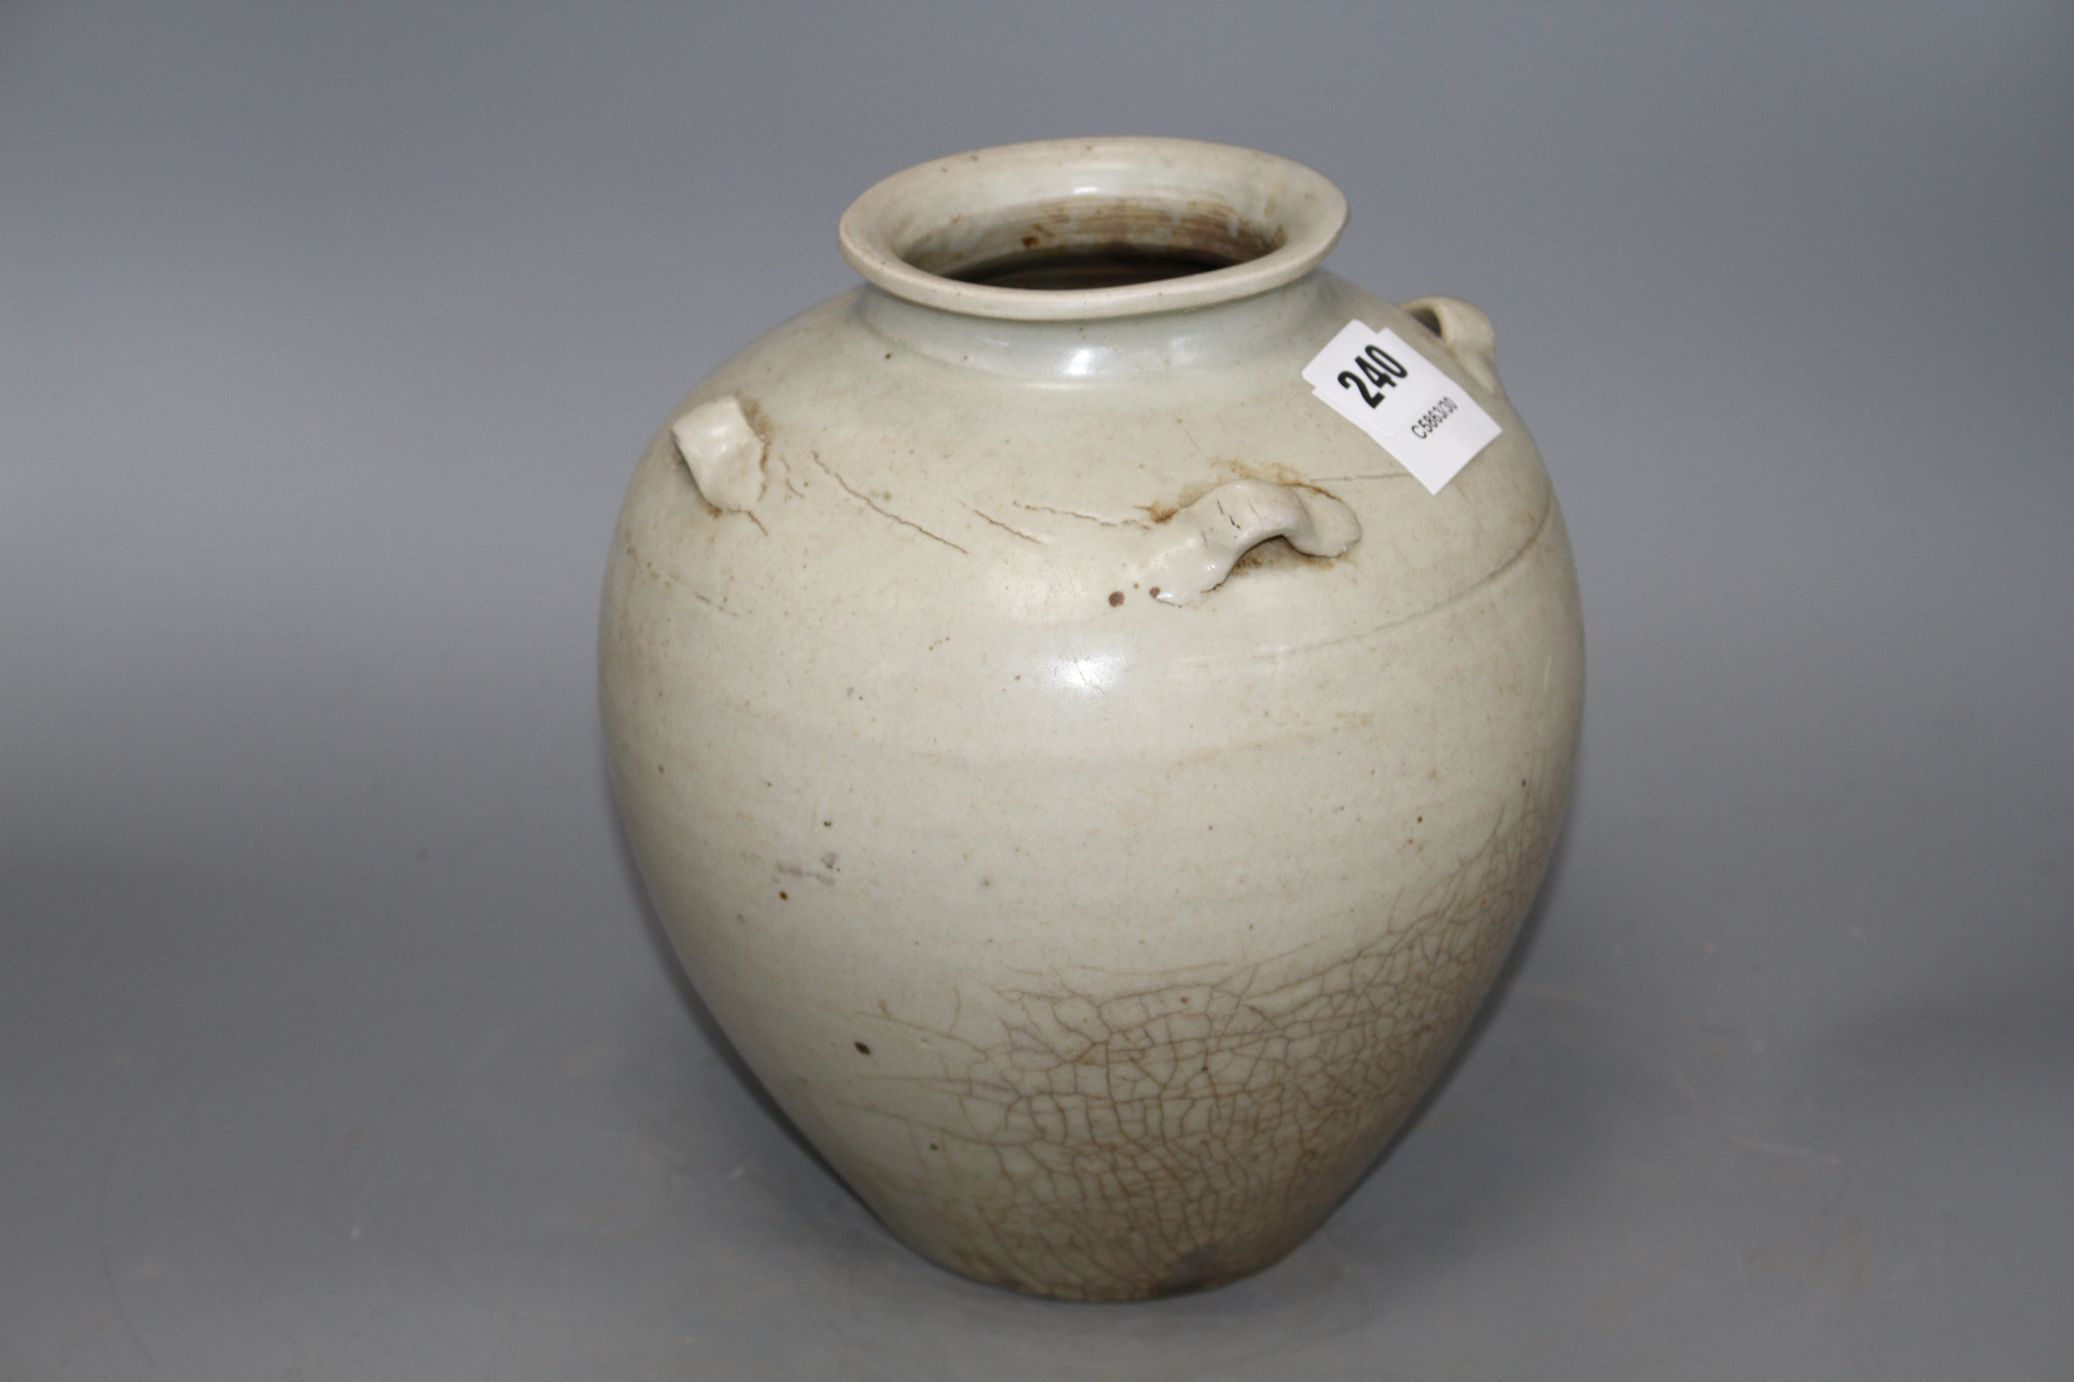 A Chinese Ding type vase, Ming dynasty or later, with loop handles, height 22cm Condition: Natural - Image 3 of 5